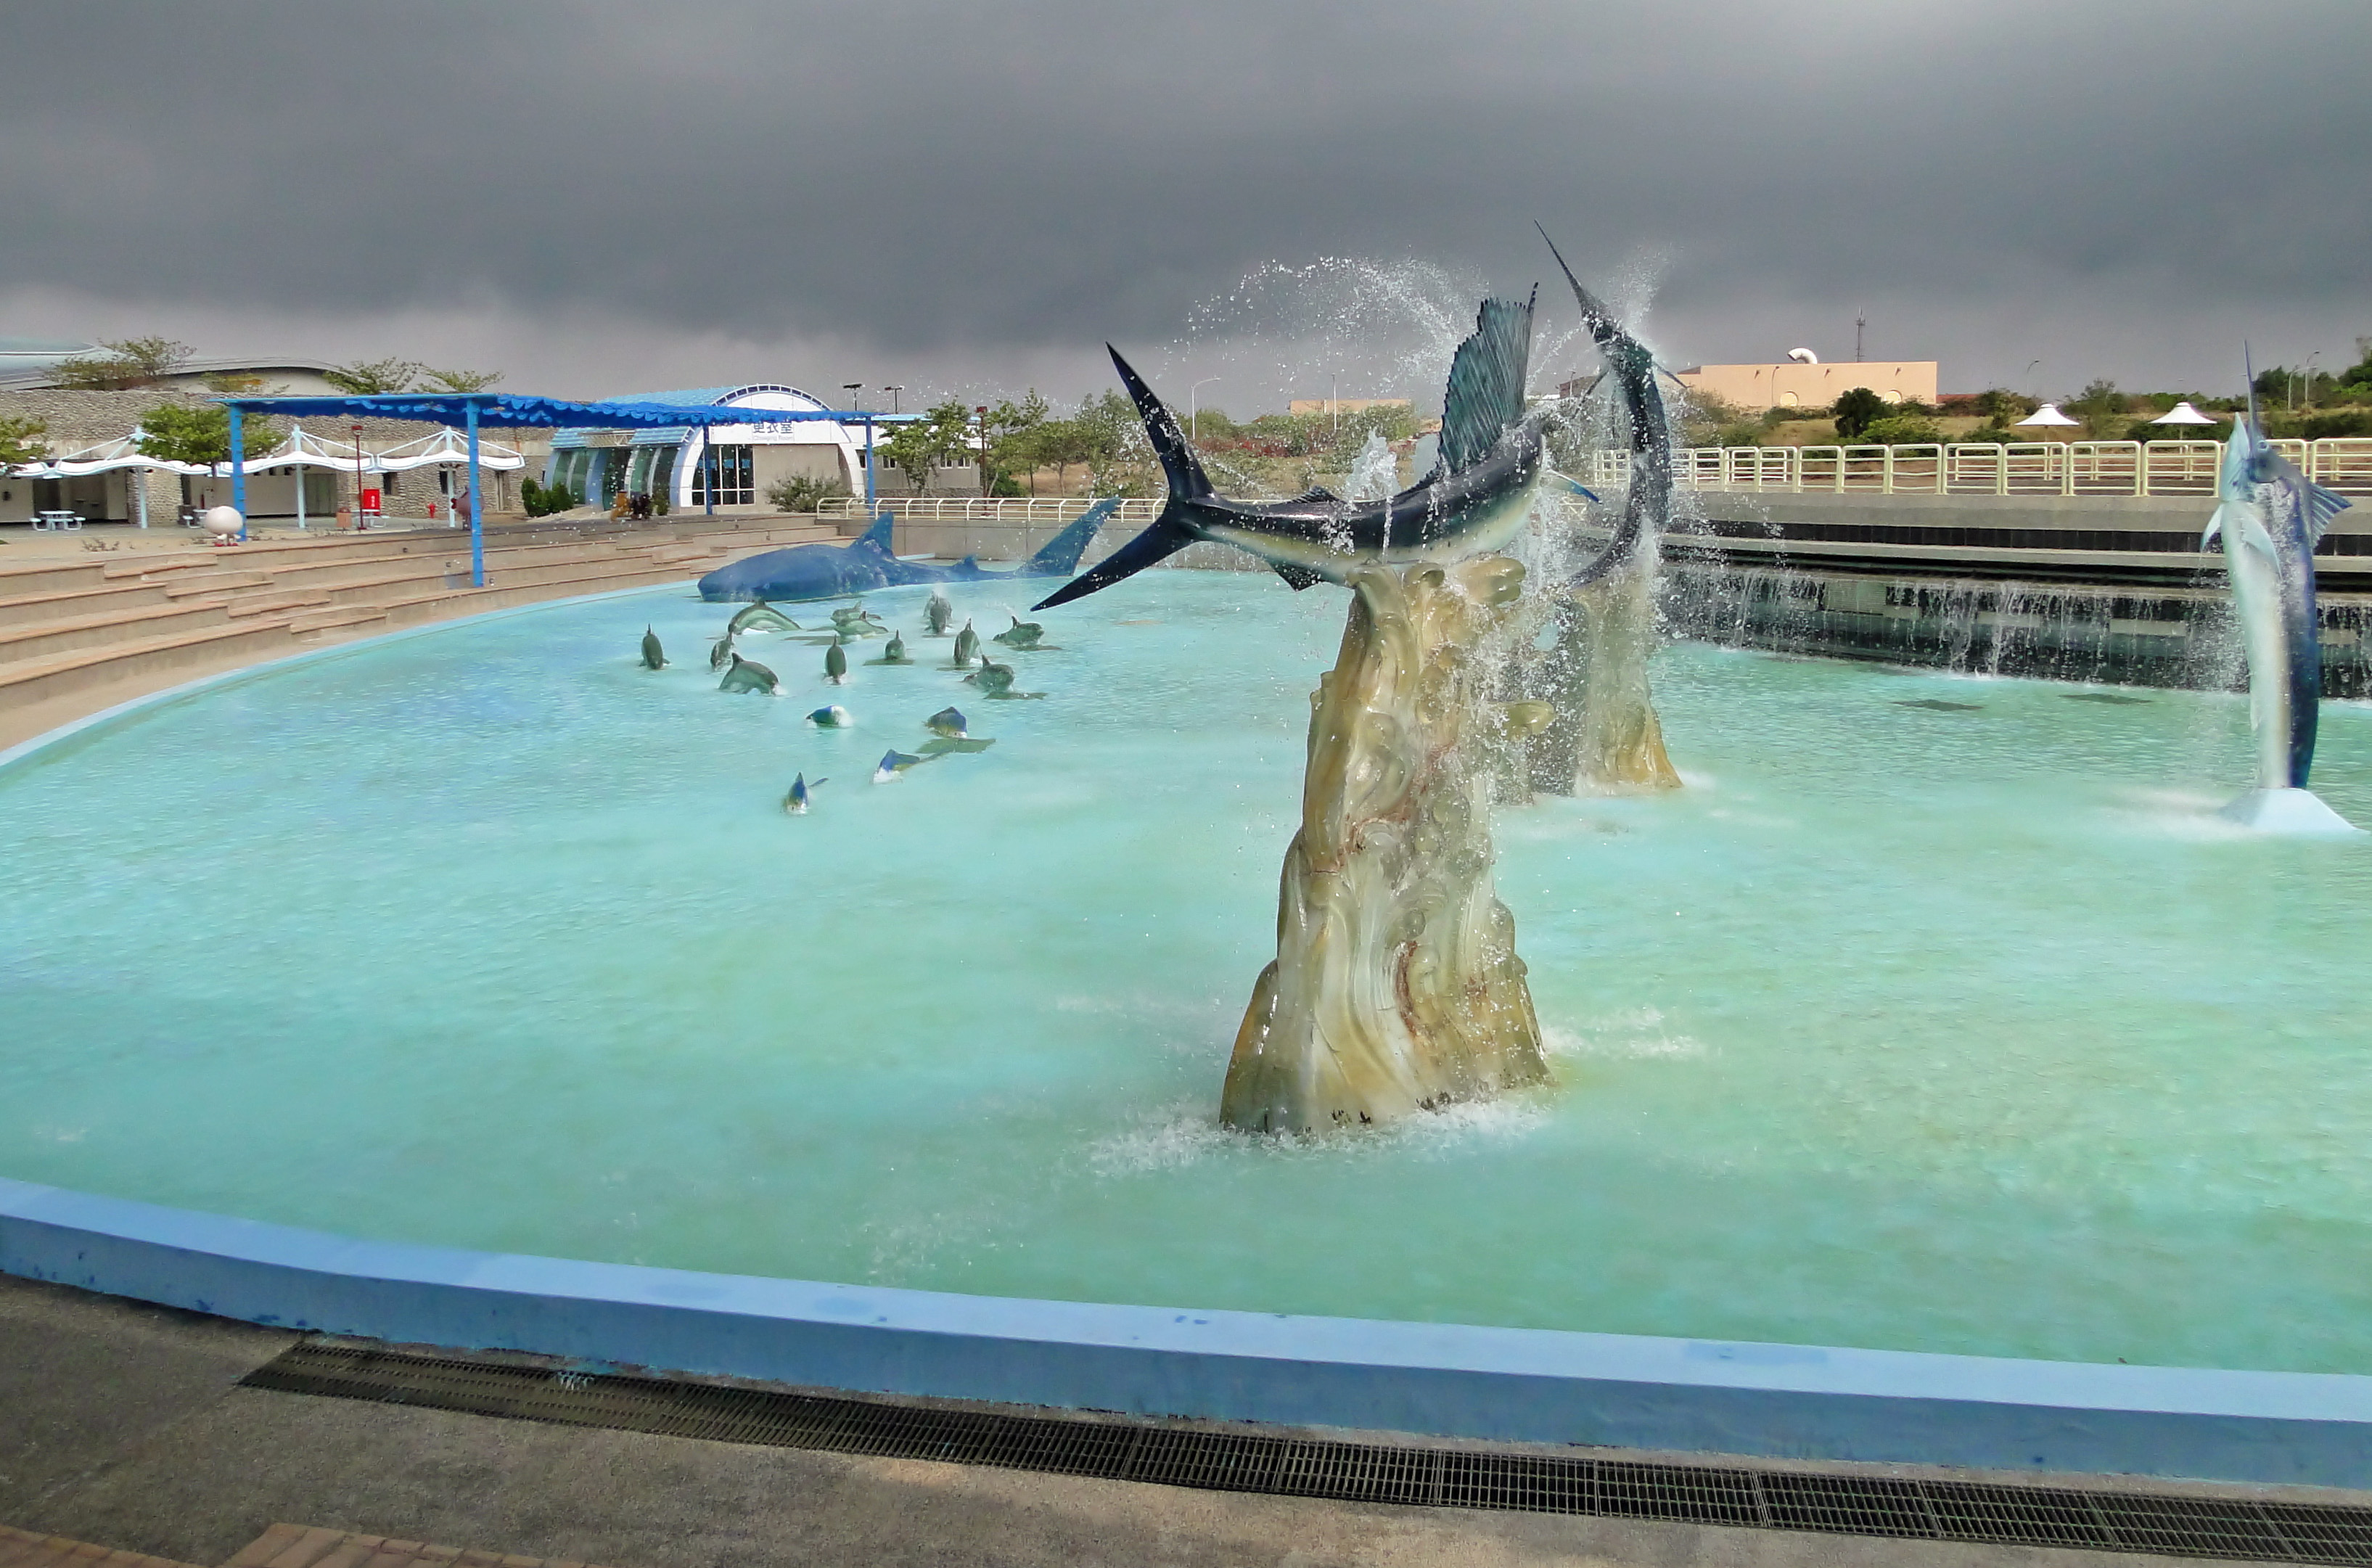 The National Museum of Marine Biology and Aquarium in Taiwan, East Asia | Museums - Rated 4.2